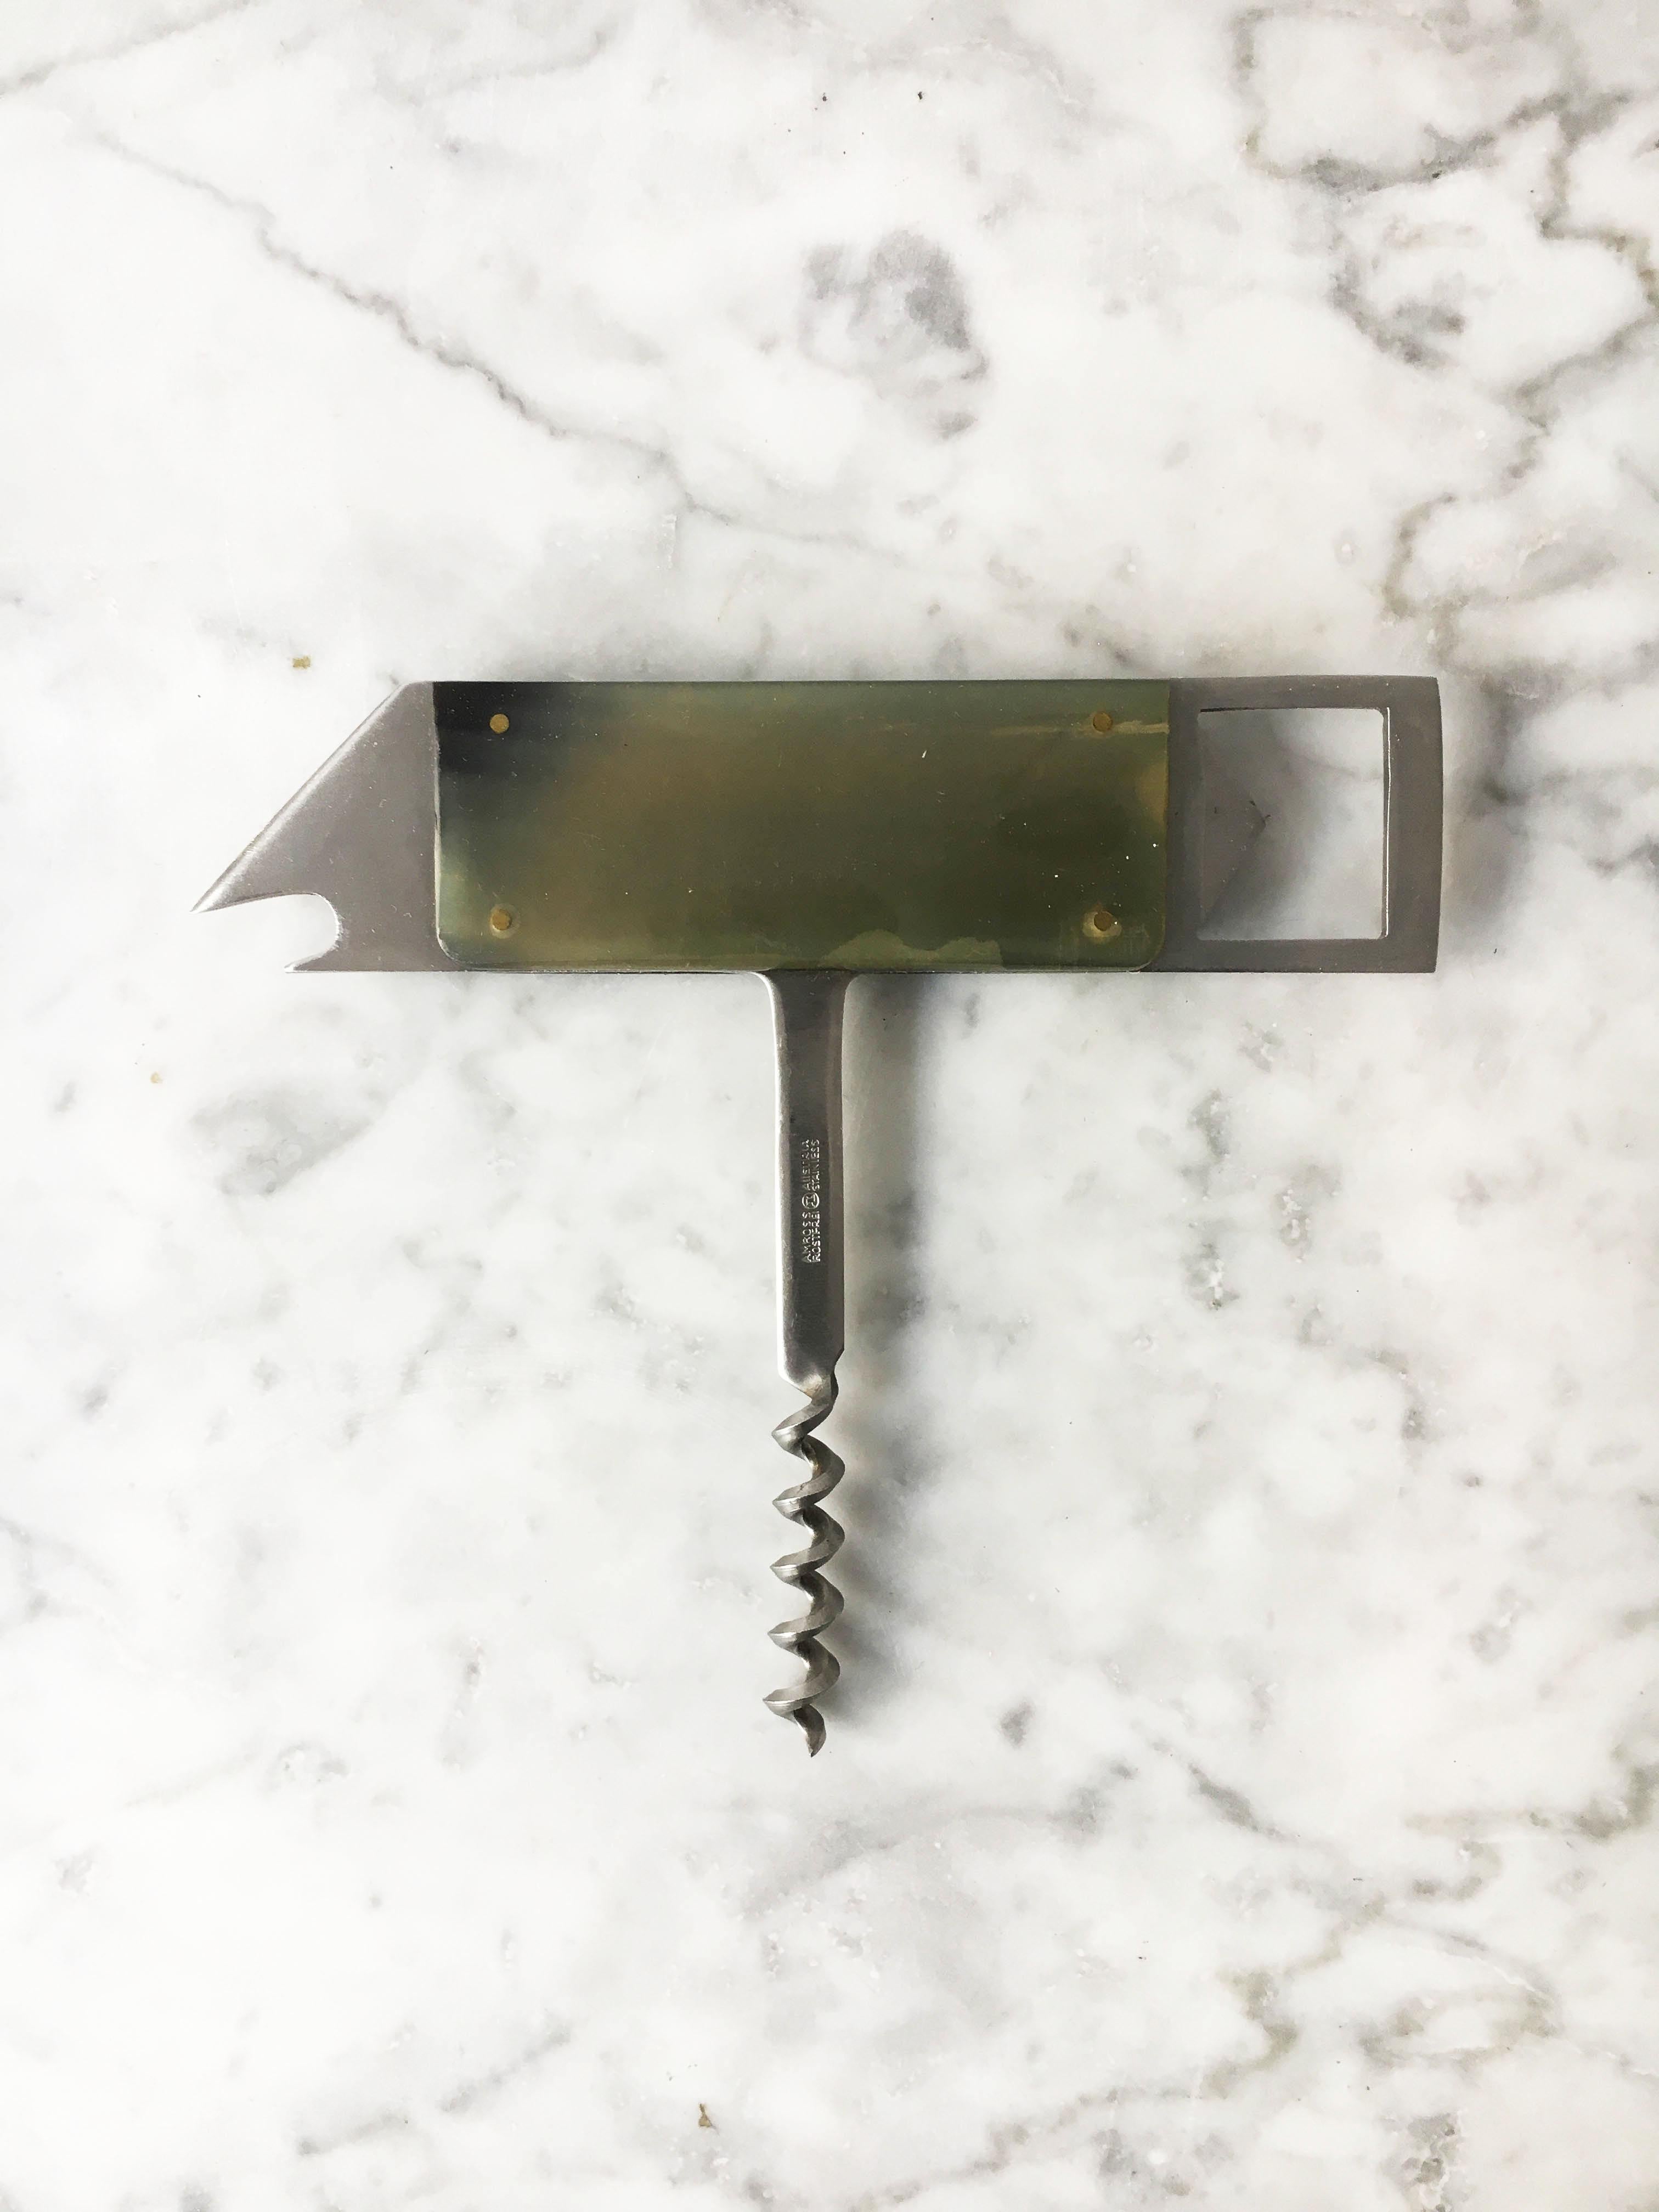 A beautiful abstract fish shaped bottle opener cork screw design object by Carl Auböck. The minimalist sculptural shape is made in stainless steel covered in horn plates. In excellent condition with just the right amount of lovely gently aged patina.